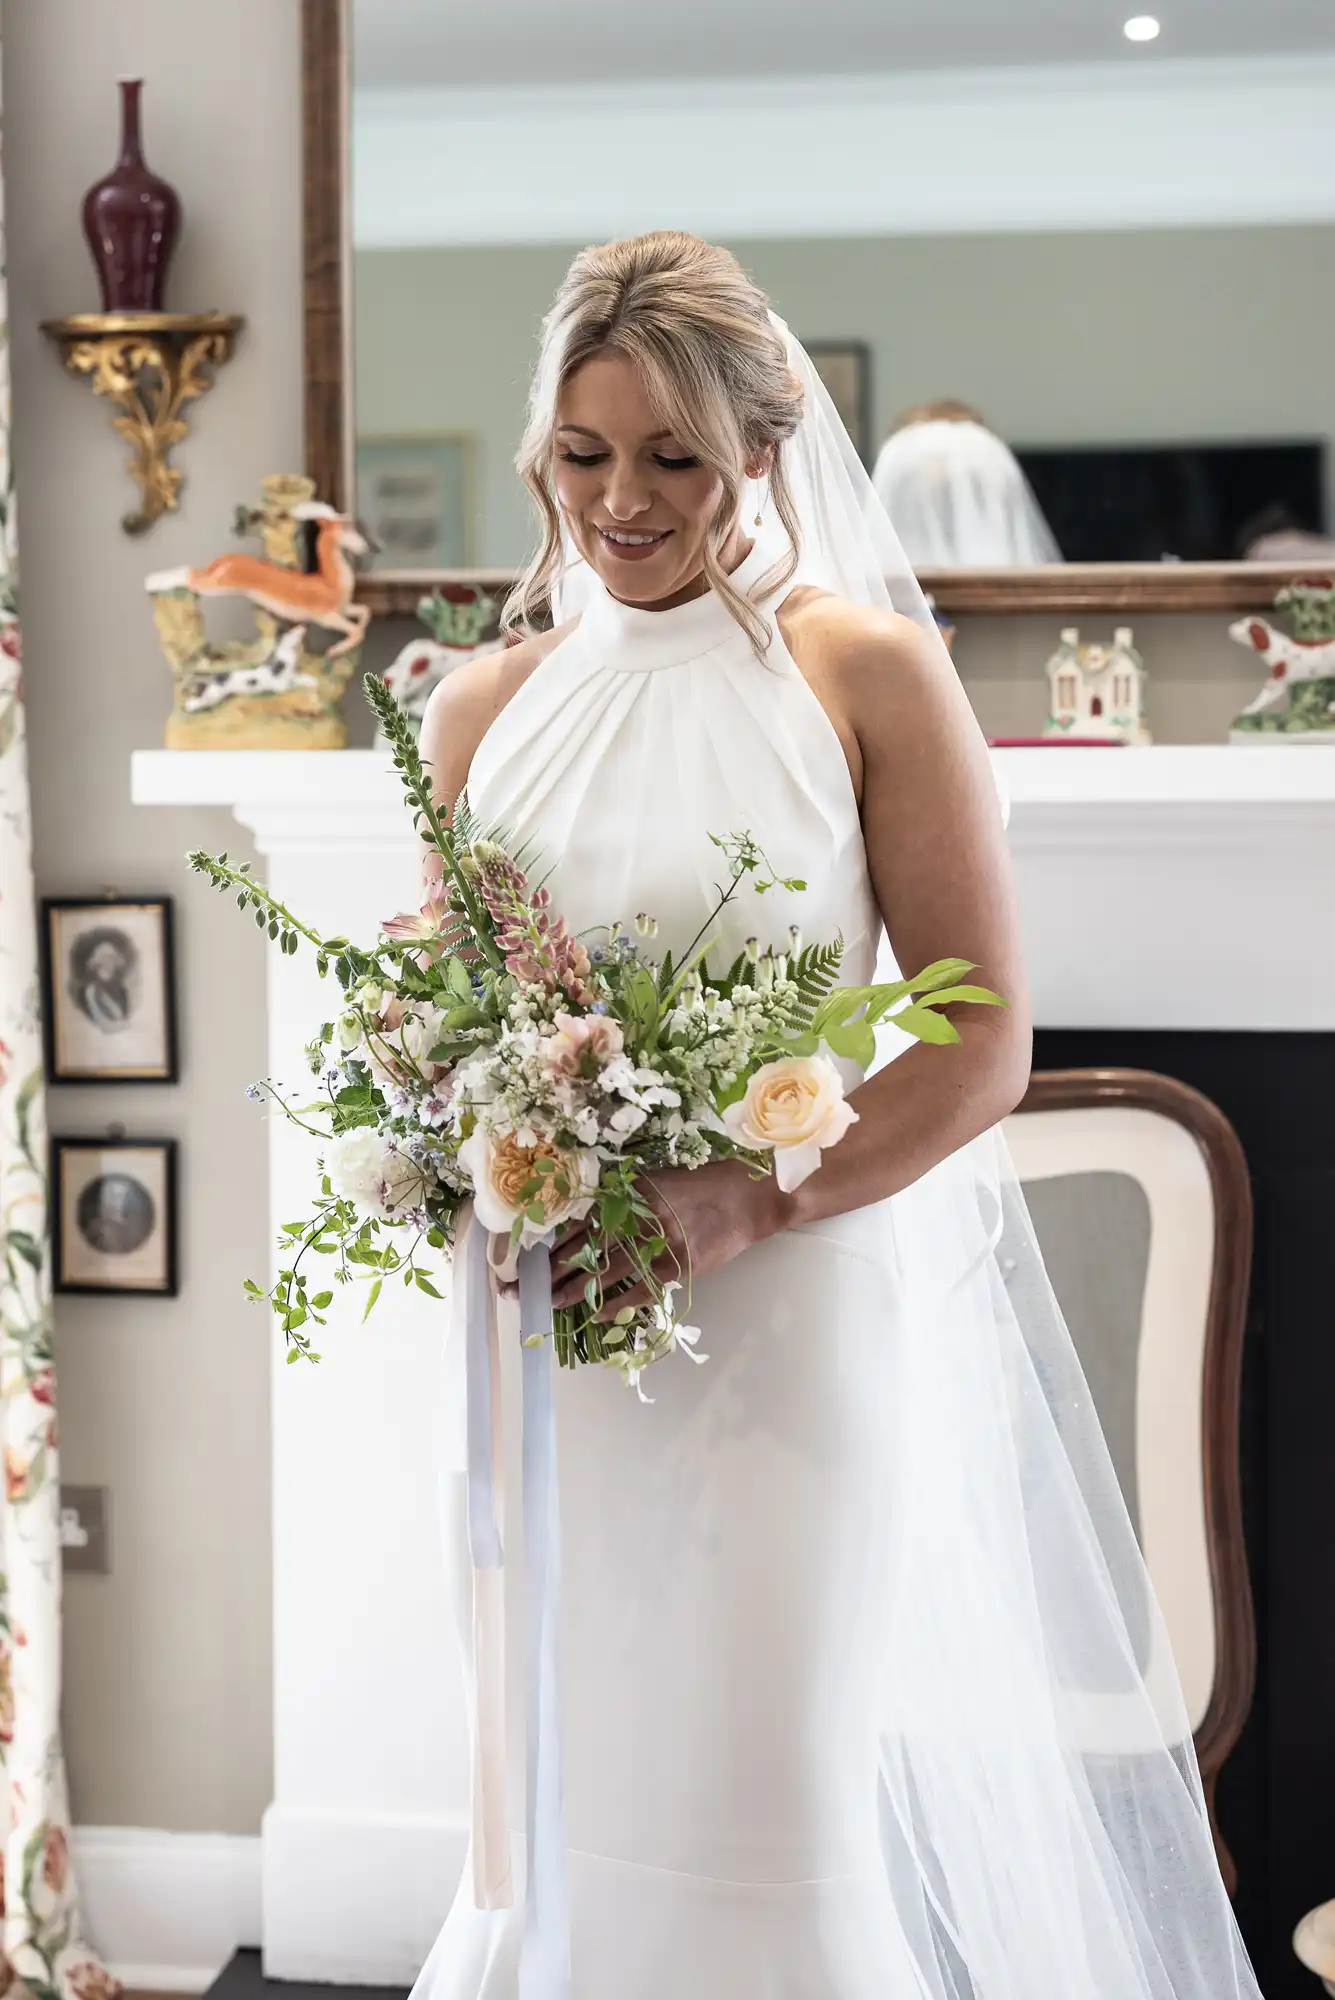 A bride in a white halter-neck gown holding a bouquet, smiling gently, indoors with decorative items in the background.